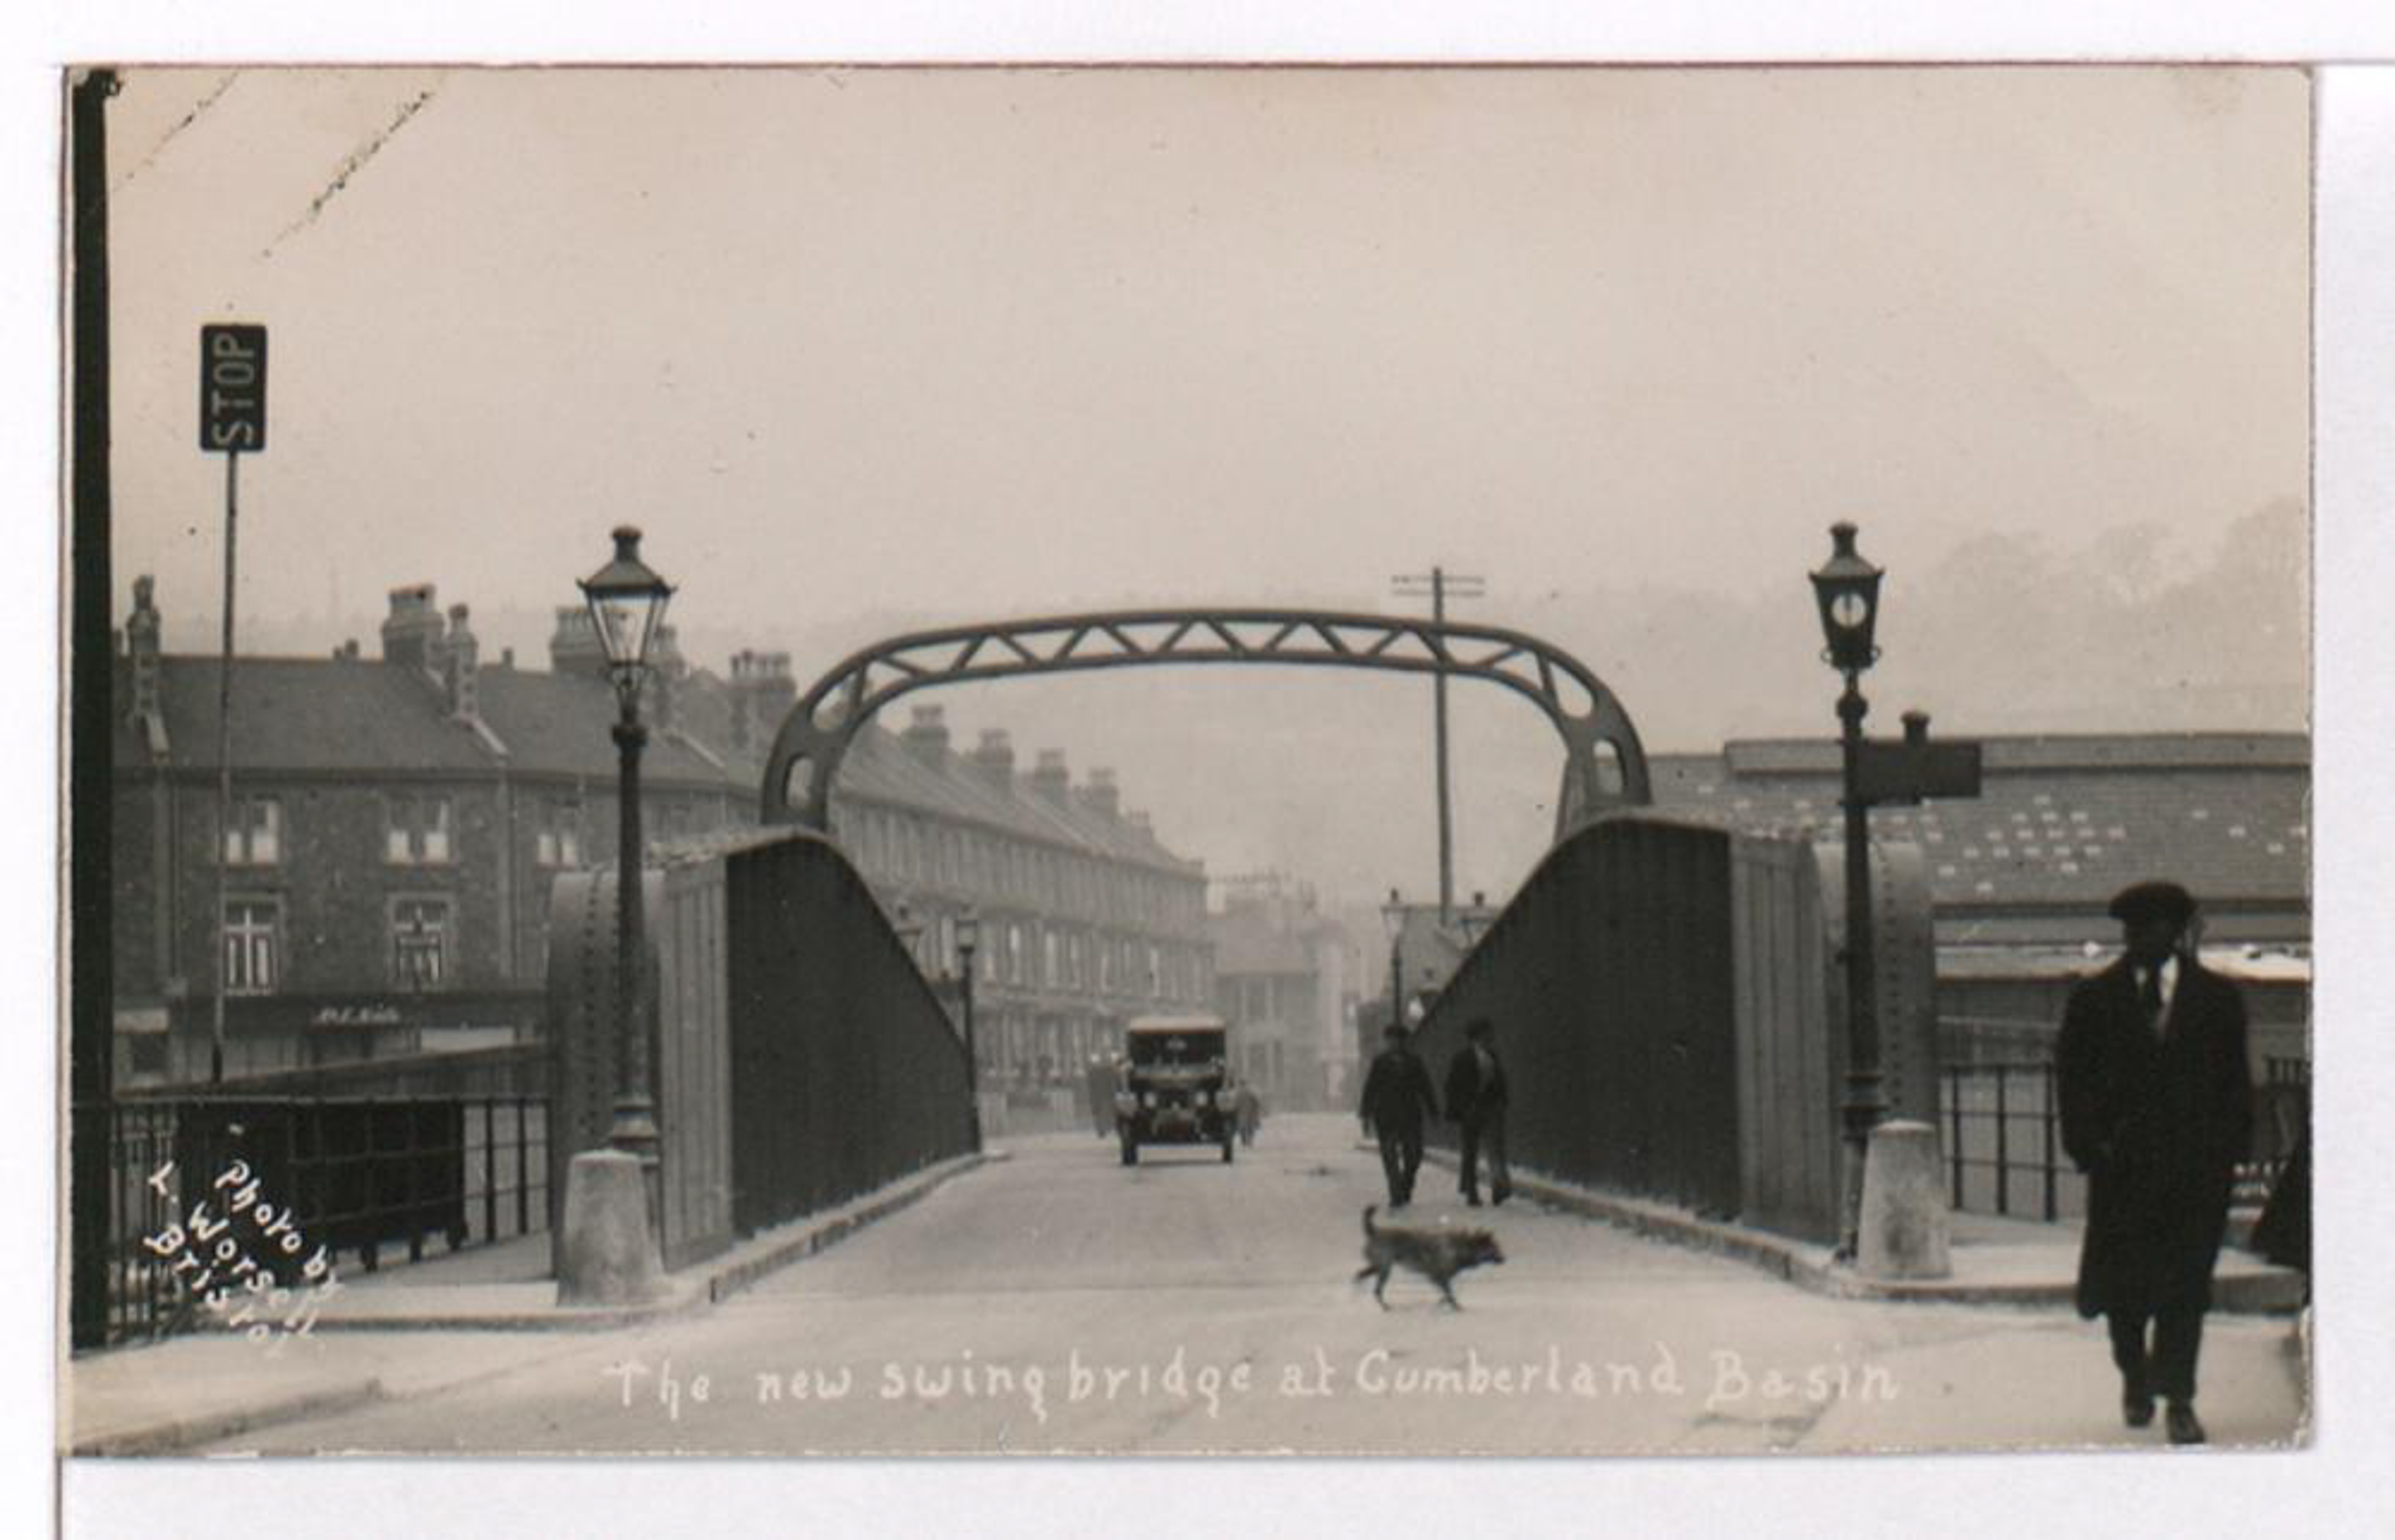 The New Swing Bridge at Cumberland Basin, c.1930s
Photograph by L. Worsell, Bristol. Courtesy Bristol Archives/The Vaughan Collection
